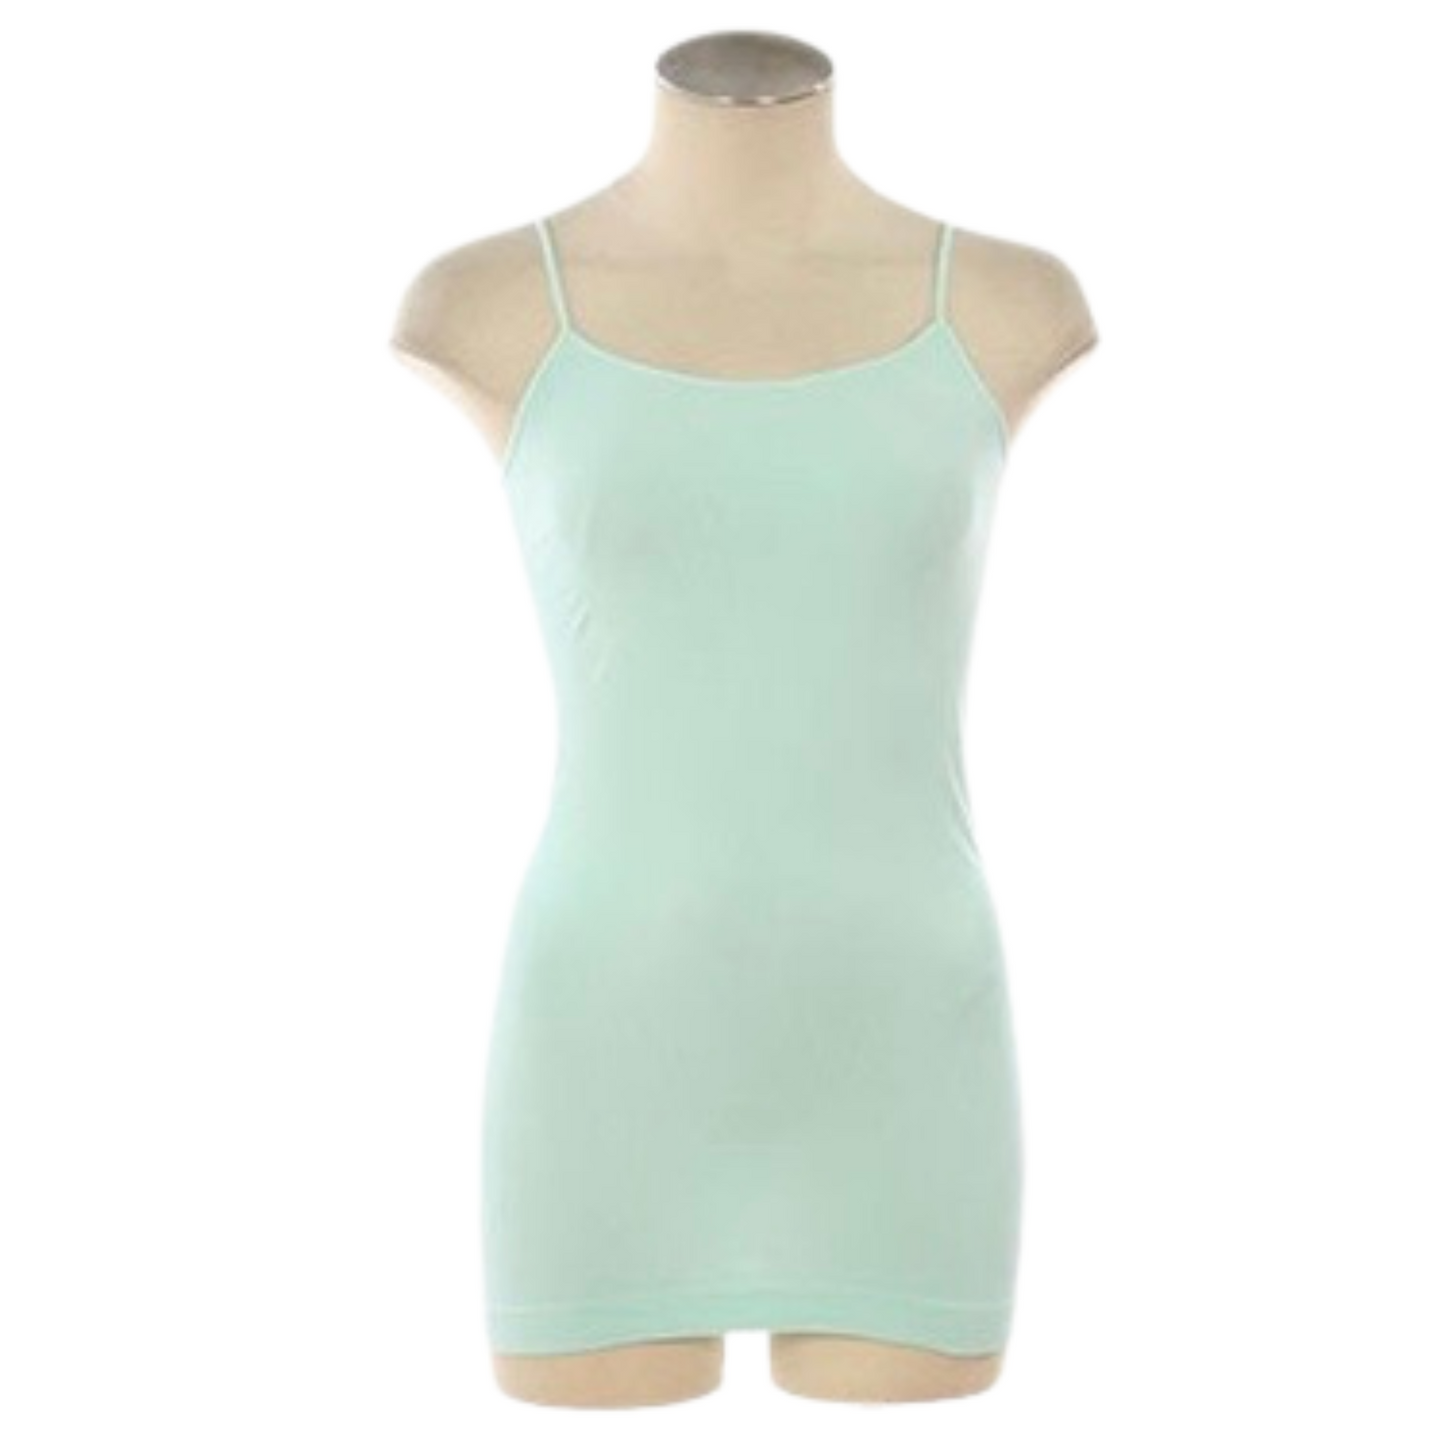 Our Long Camisoles offer you a fashionable silhouette with one size that fits most. Made of butter soft fabric, they come in a variety of colors so you can find one to match any outfit. Enjoy a comfortable, flattering fit that's perfect for any occasion.